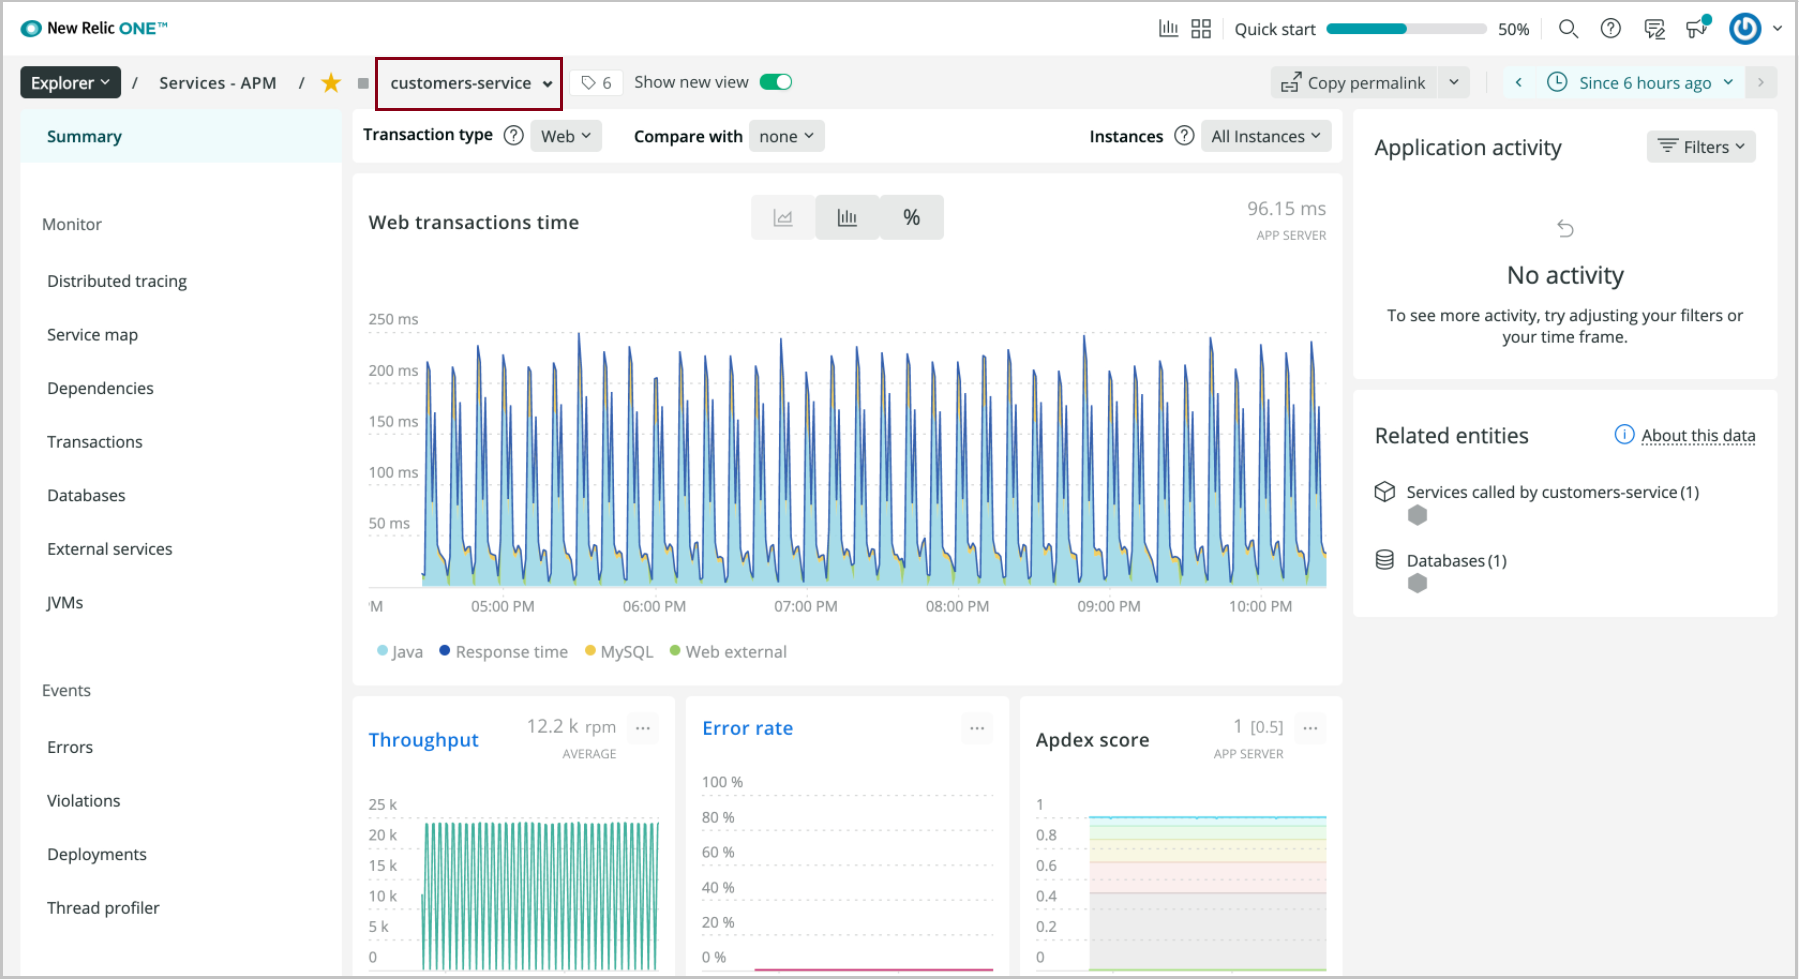 Screenshot of the New Relic dashboard showing the Customers Service page.